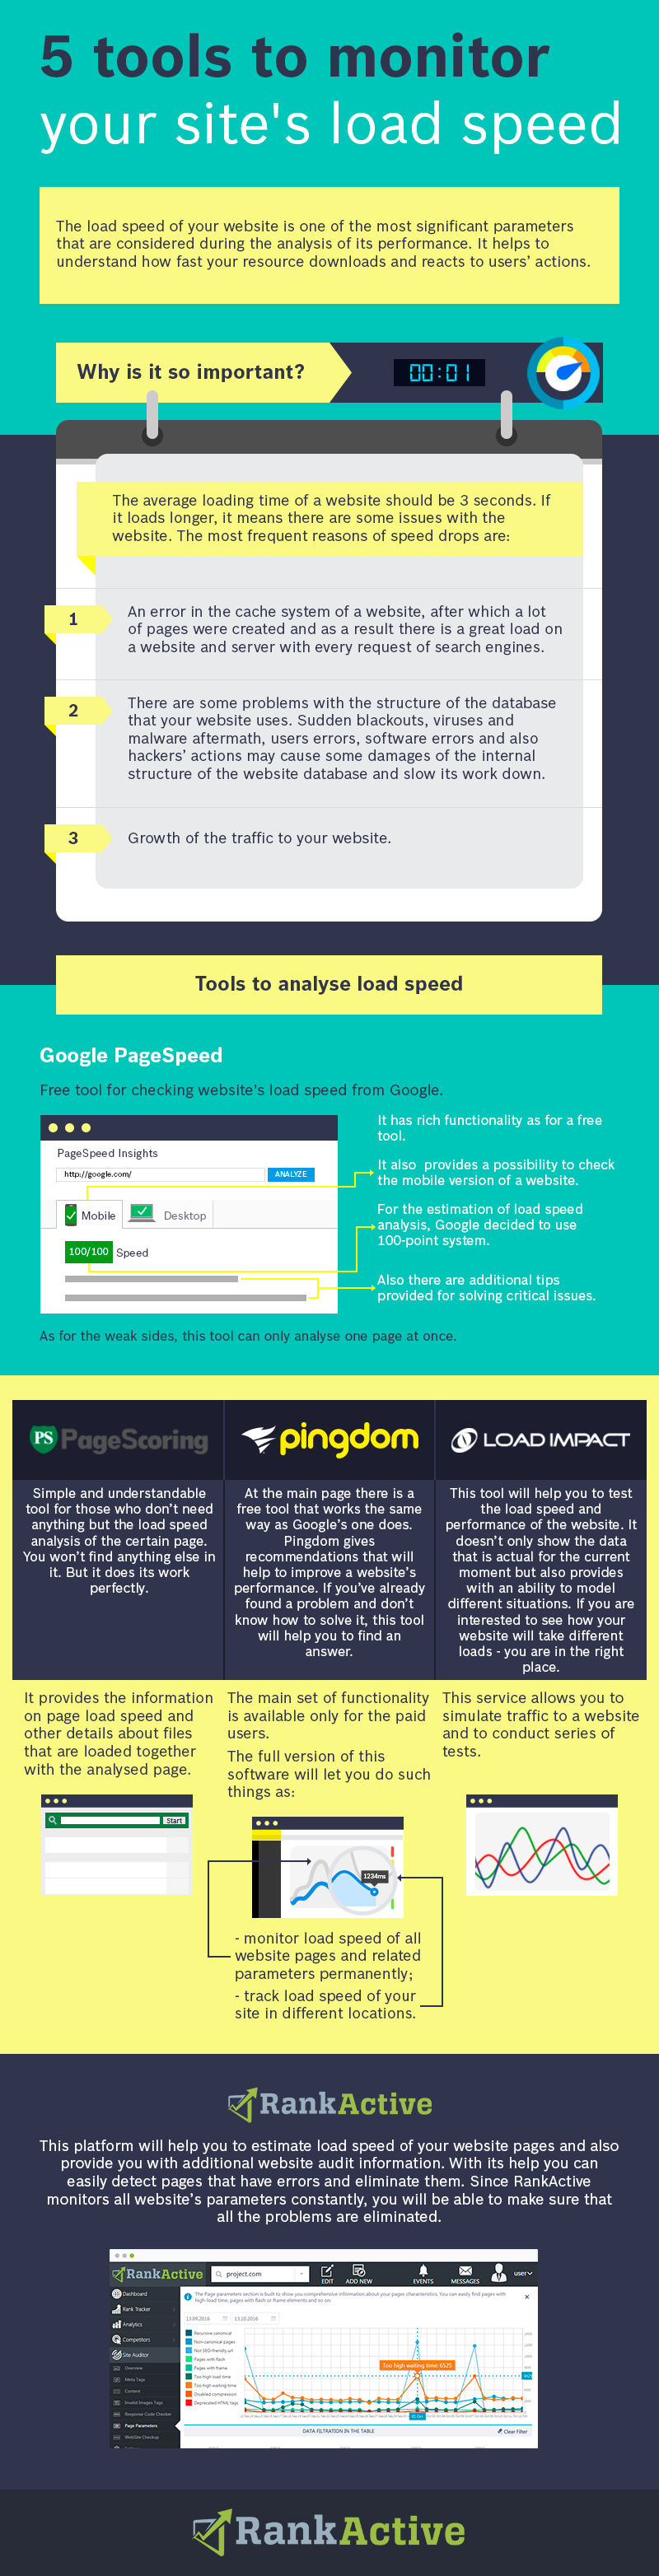 5-tools-to-monitor-your-sites-load-speed